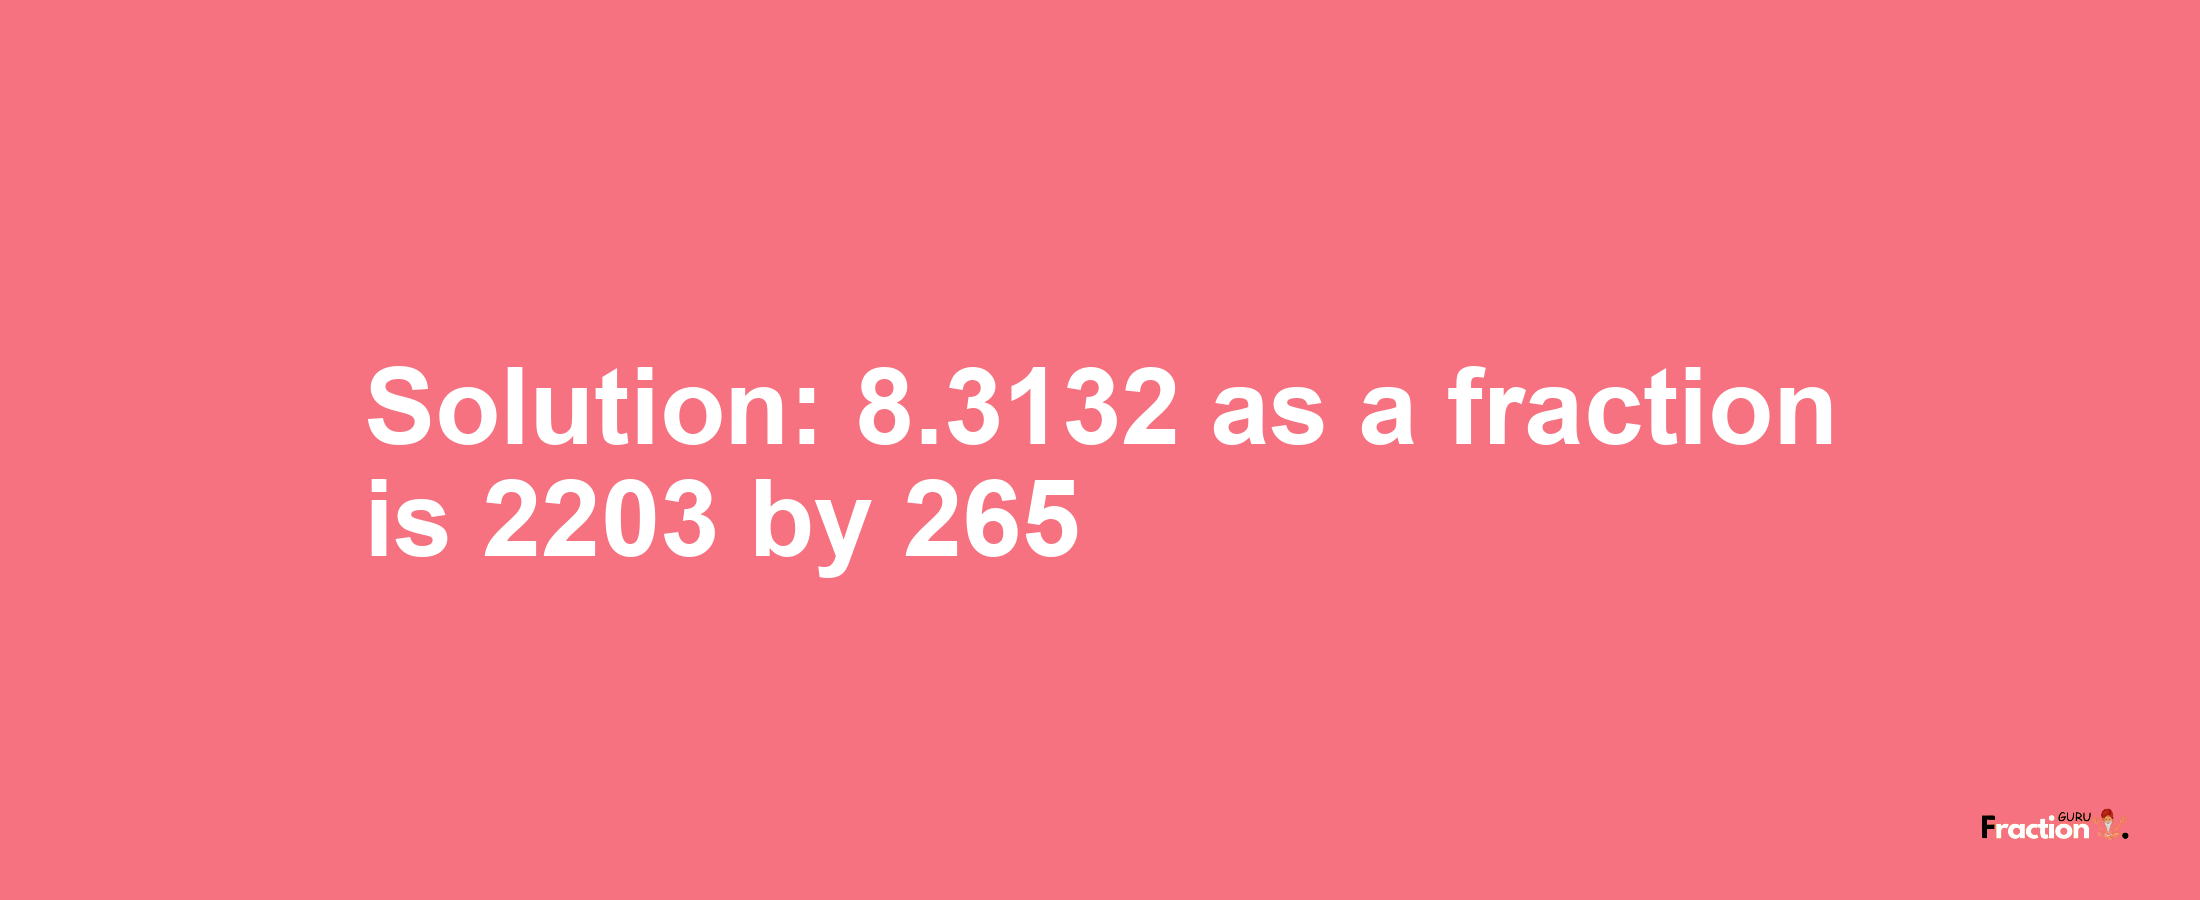 Solution:8.3132 as a fraction is 2203/265